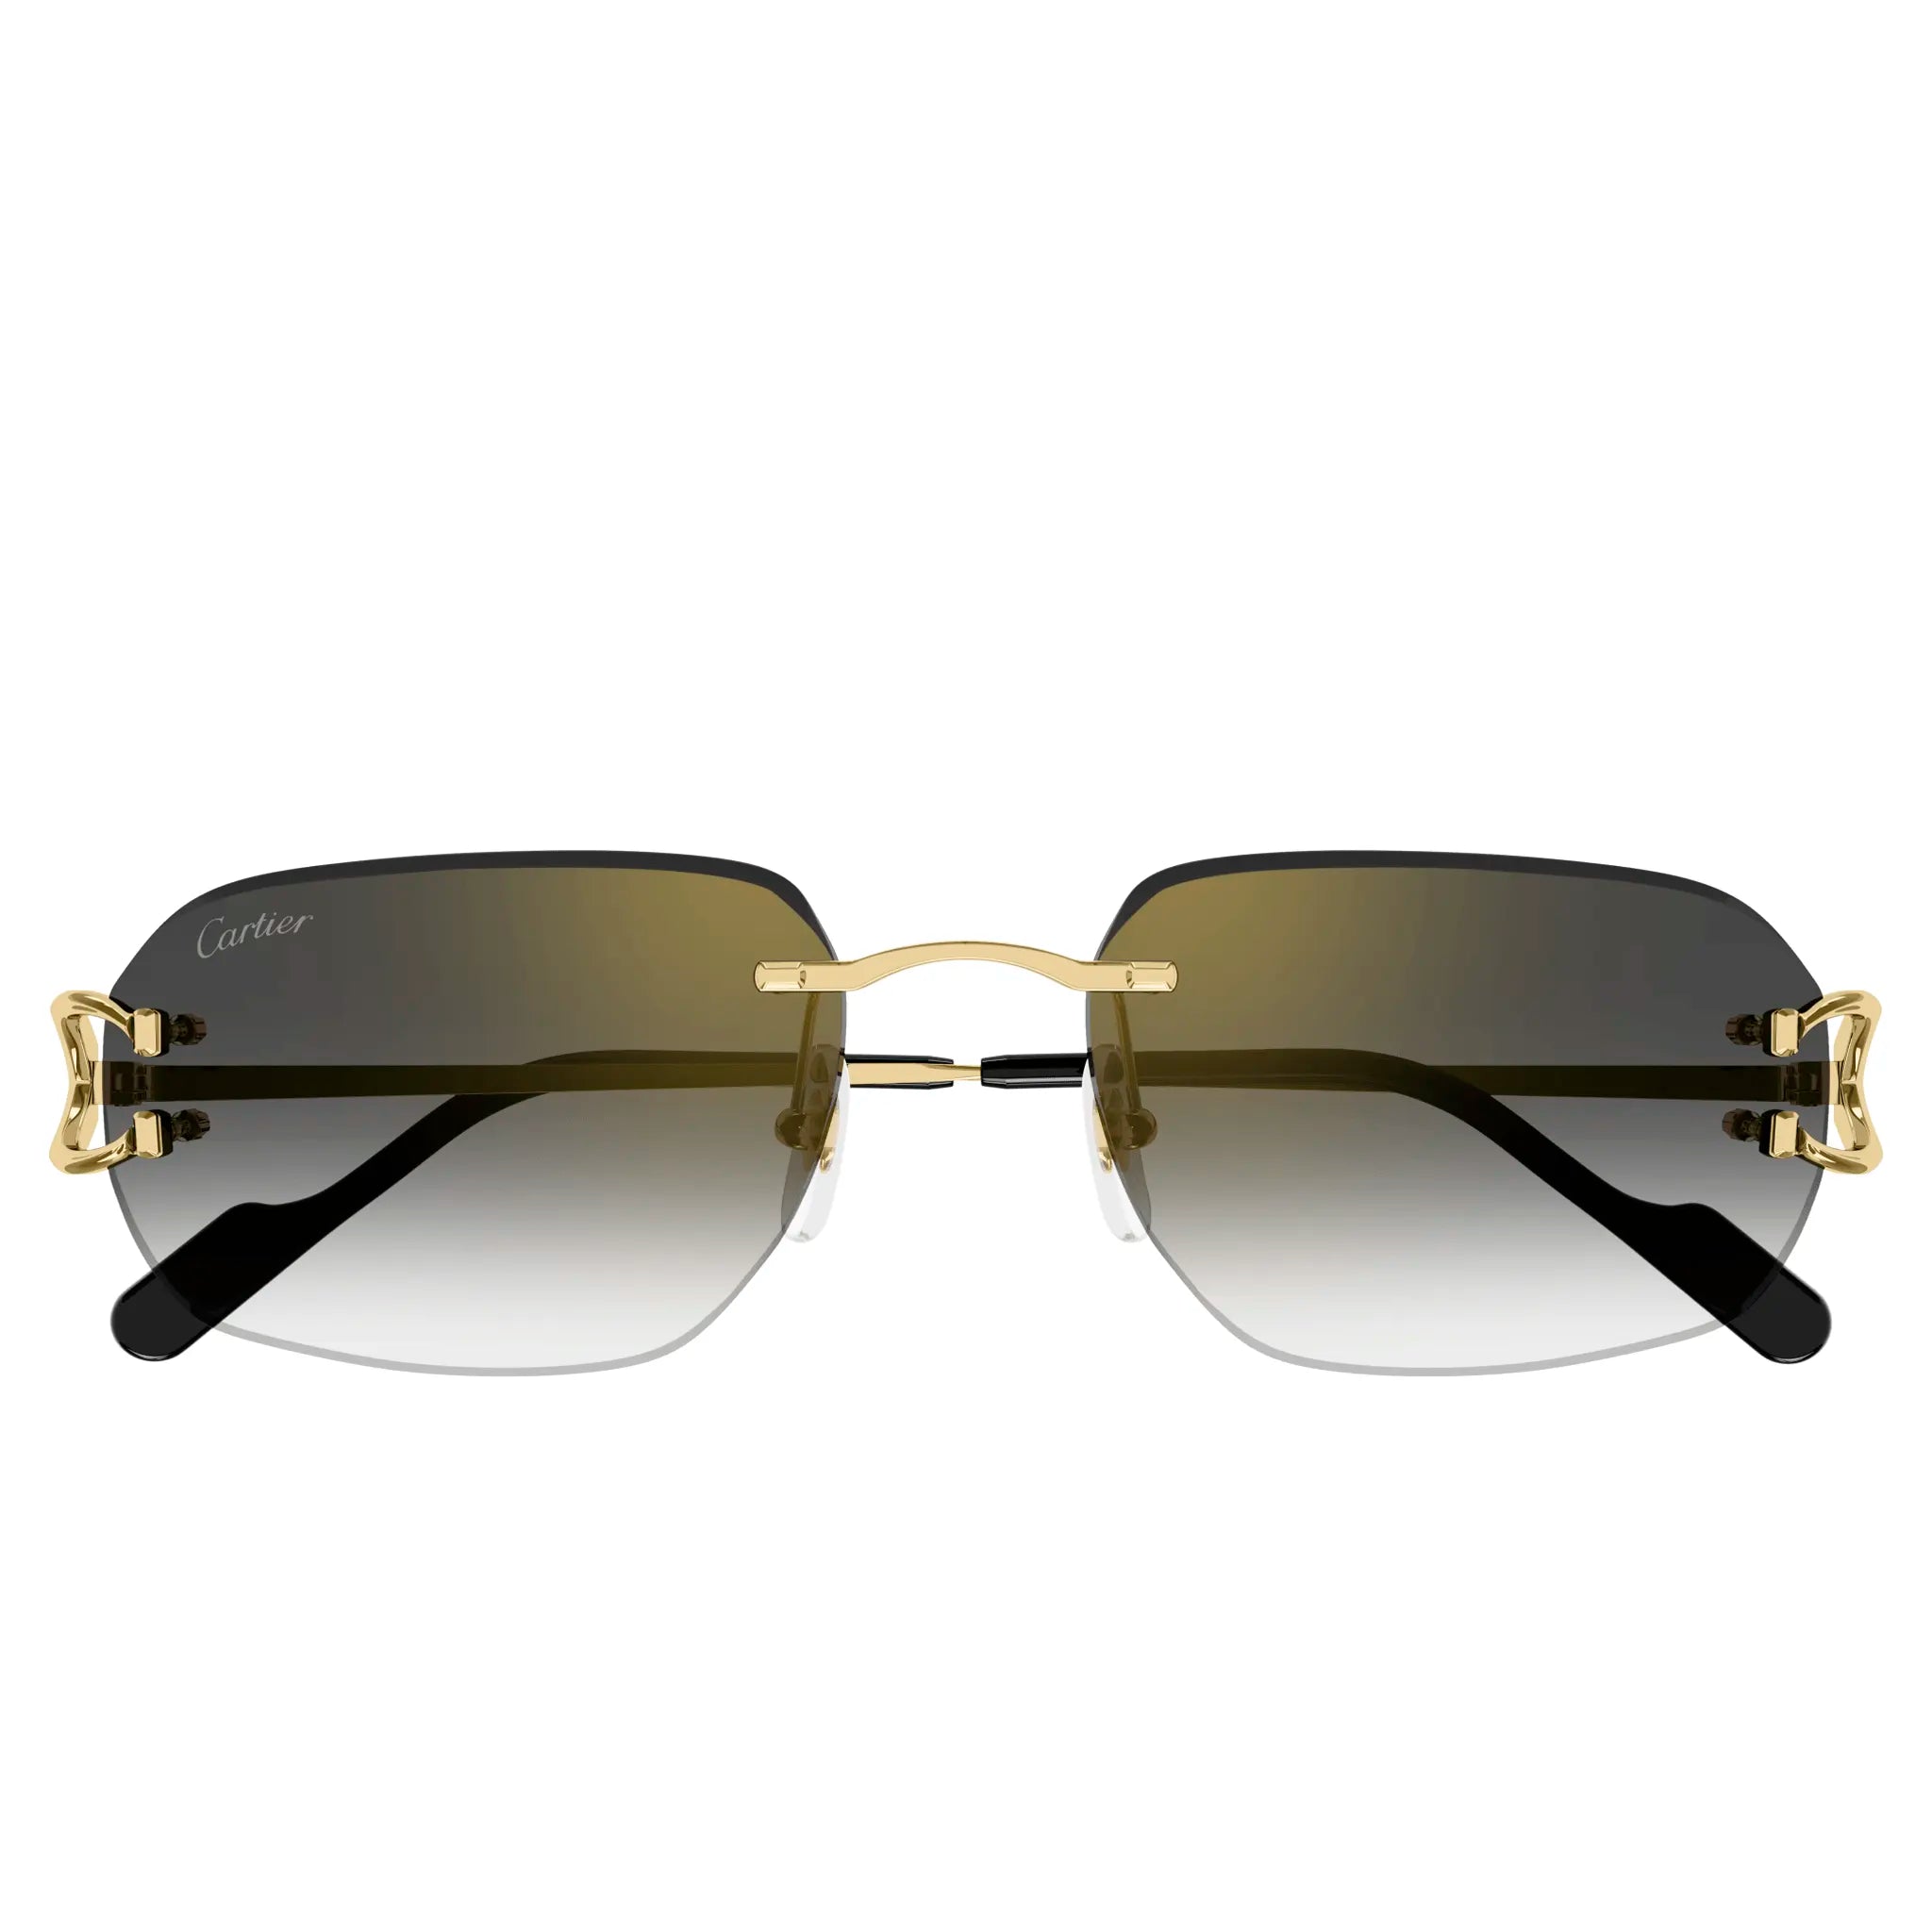 Folded view of Cartier Eyewear CT0468S-001 Gold Grey Sunglasses